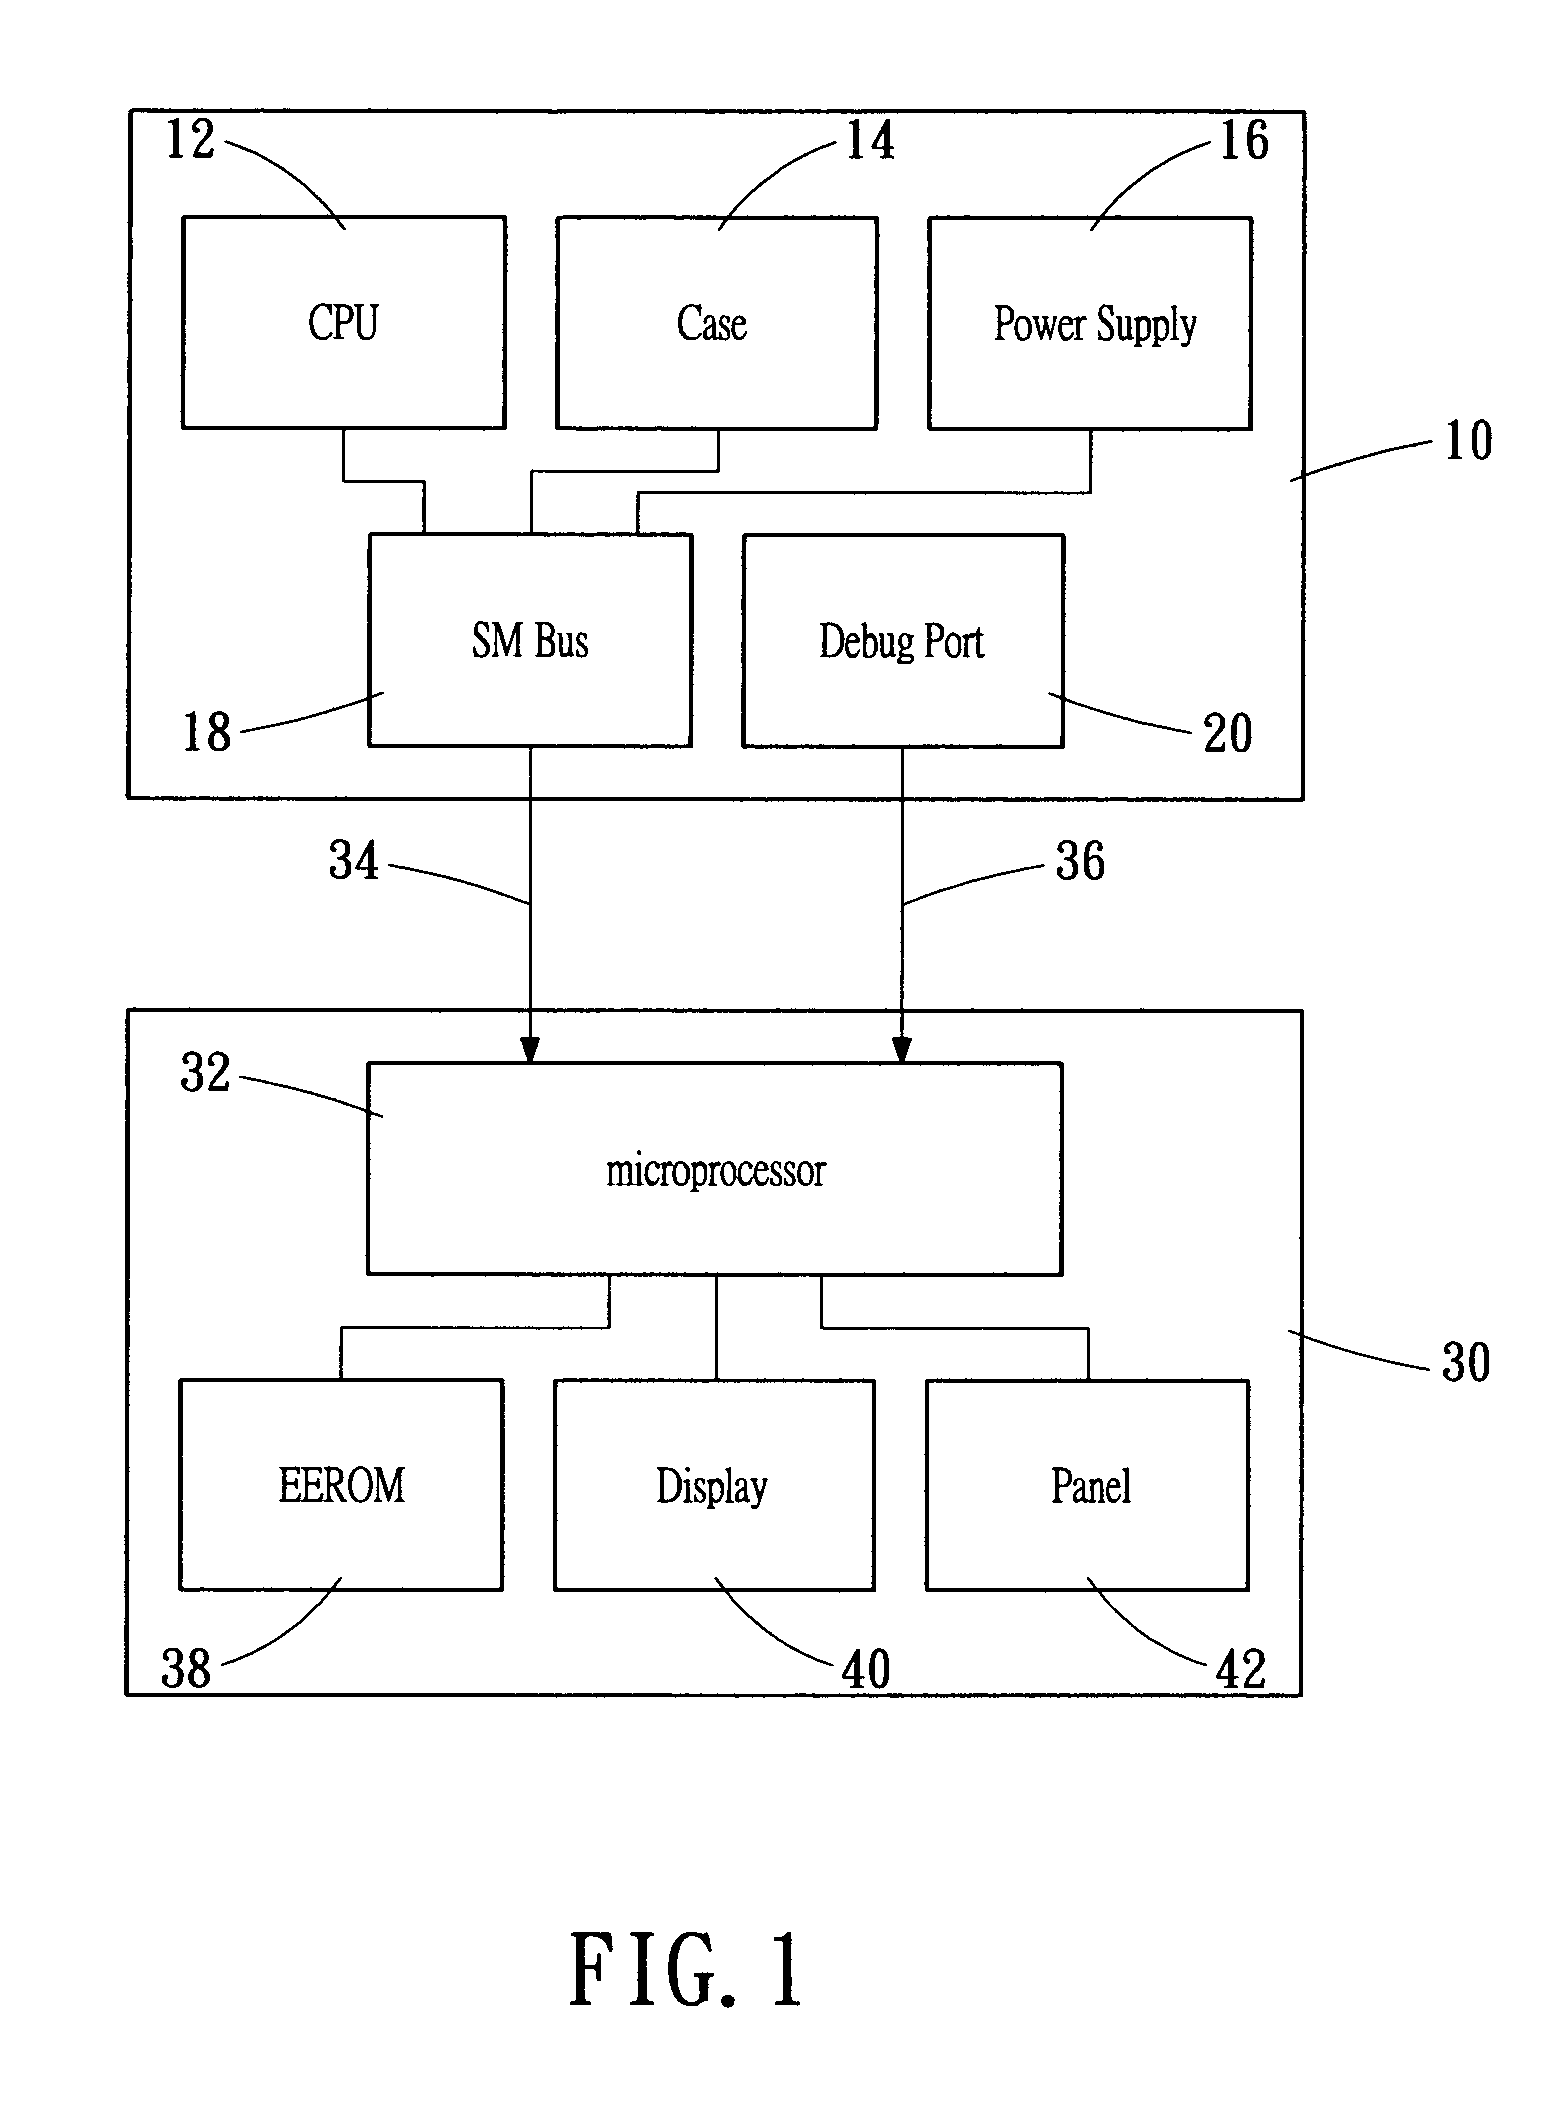 Monitor apparatus for computer system